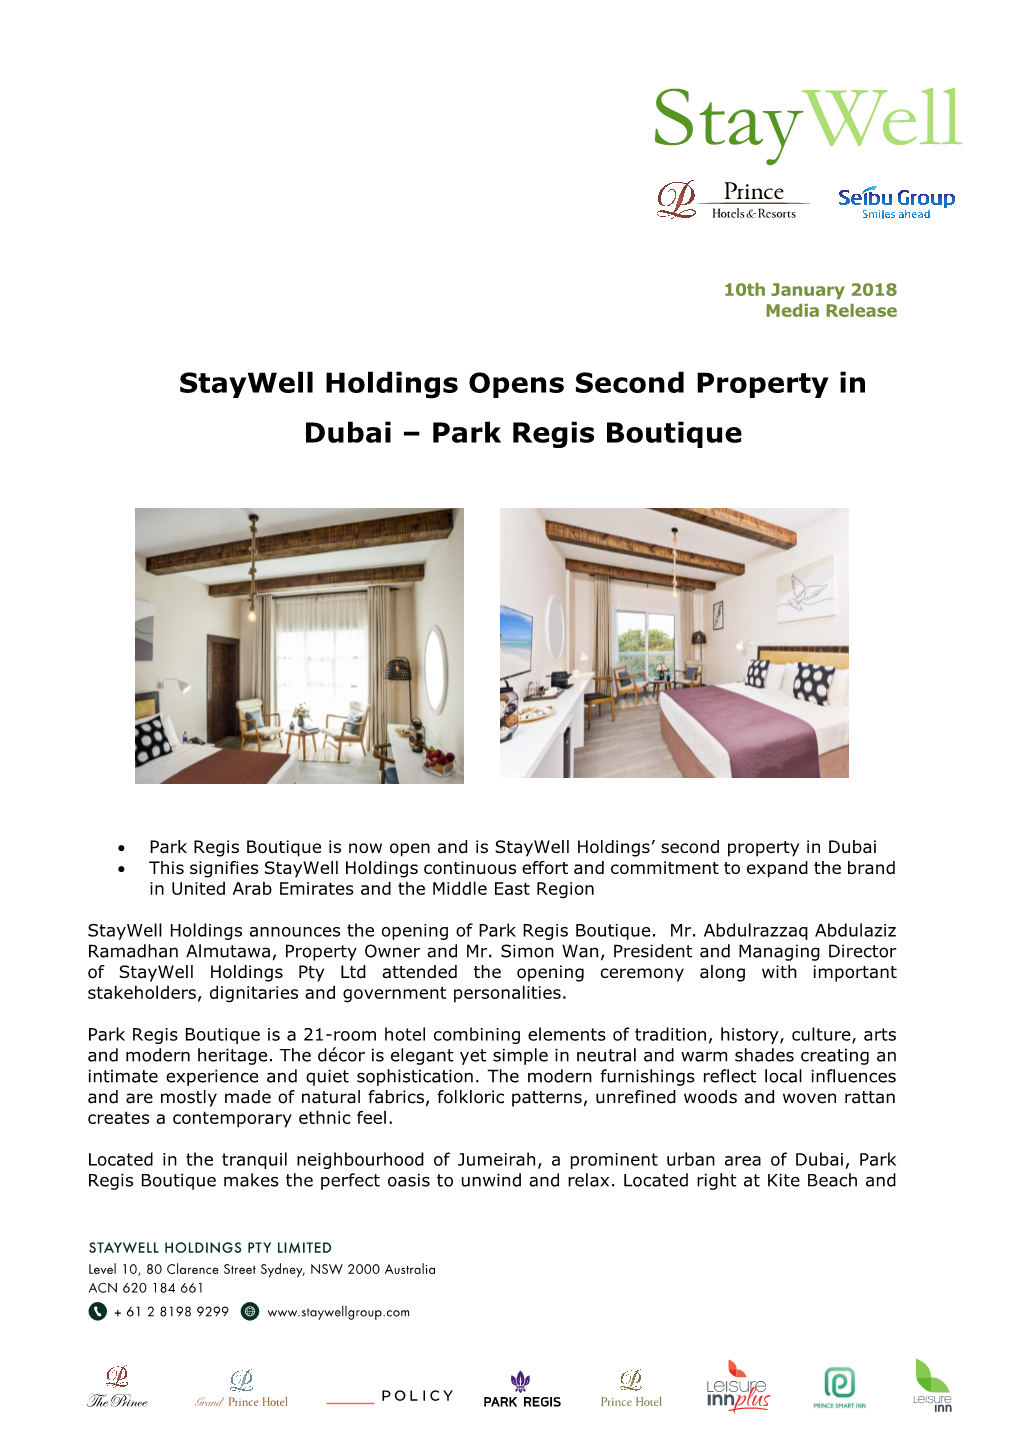 Staywell Holdings Opens Second Property in Dubai – Park Regis Boutique